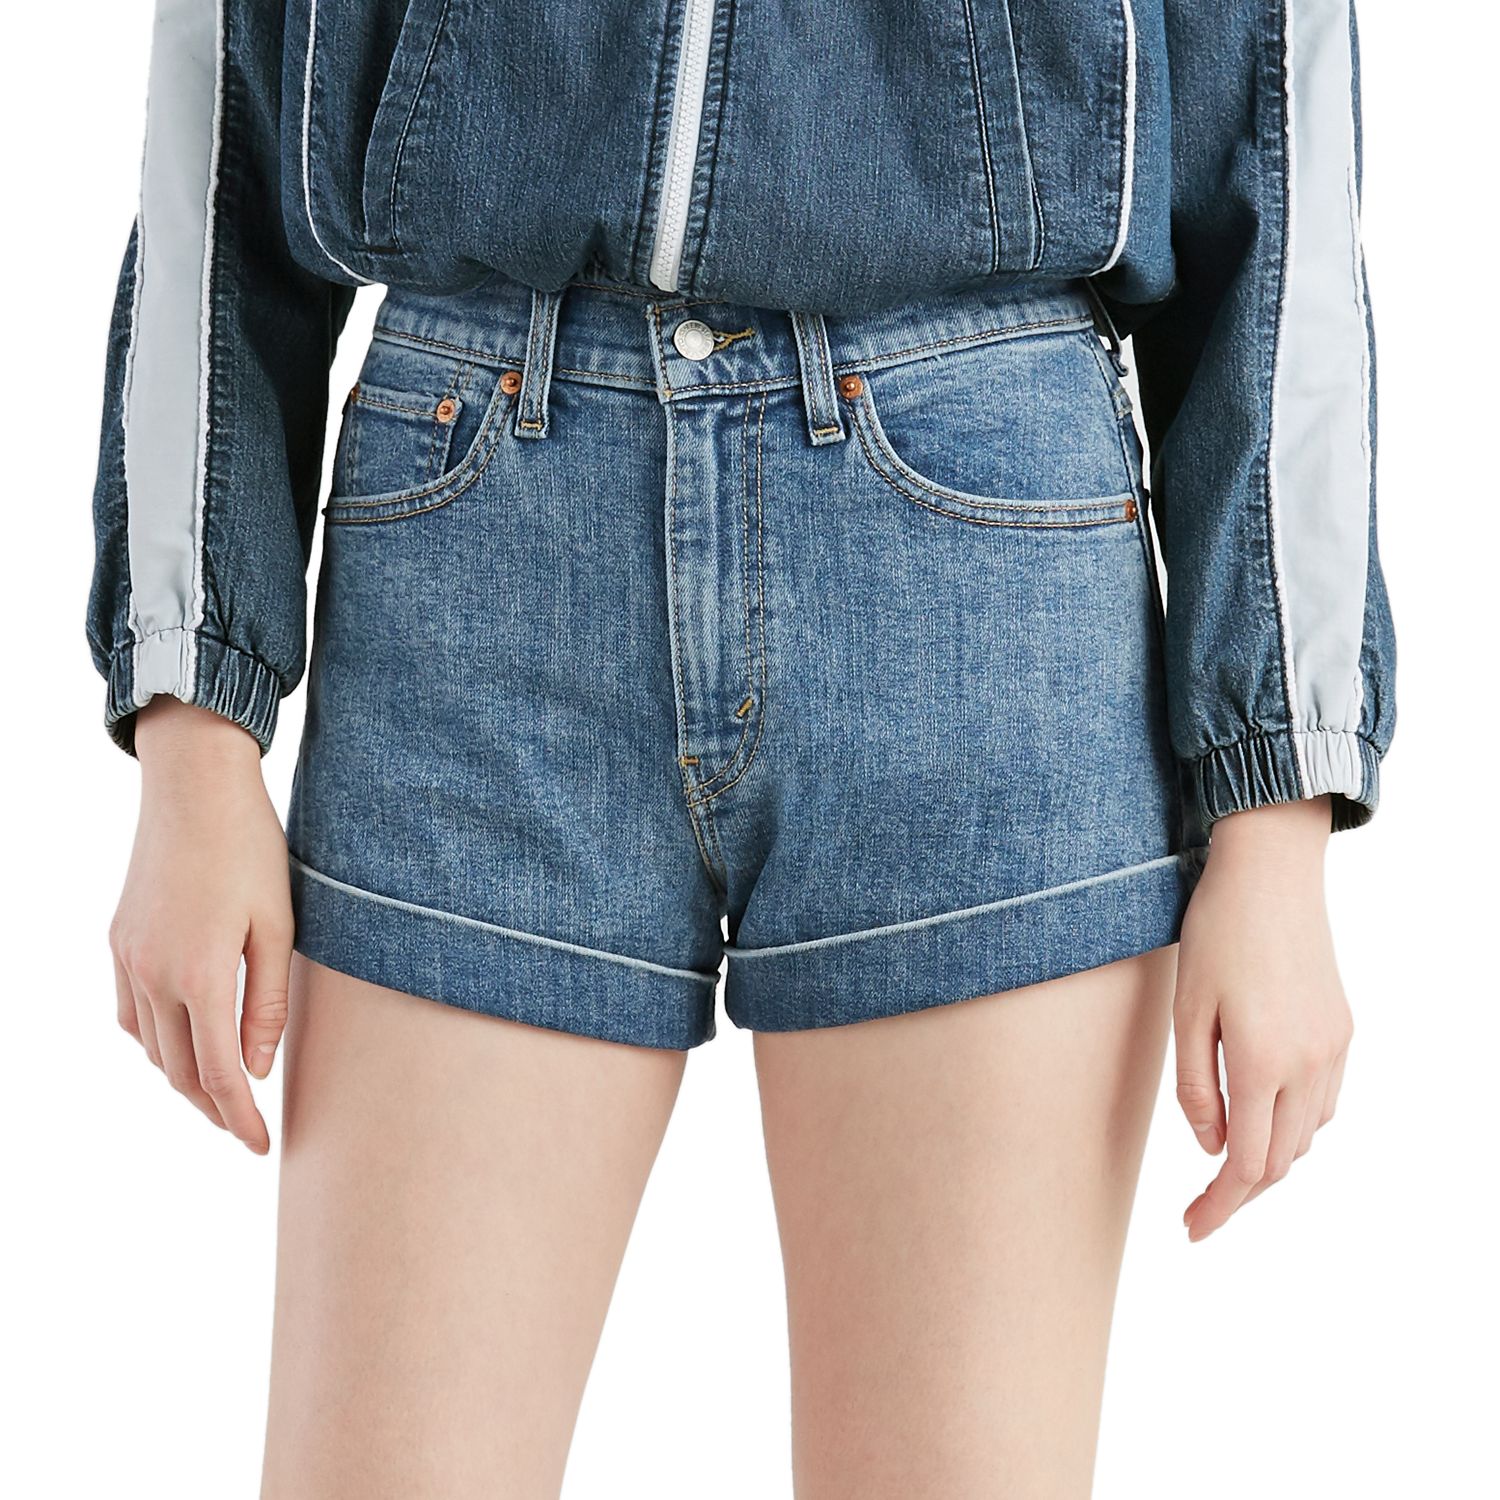 levis mom jeans shorts